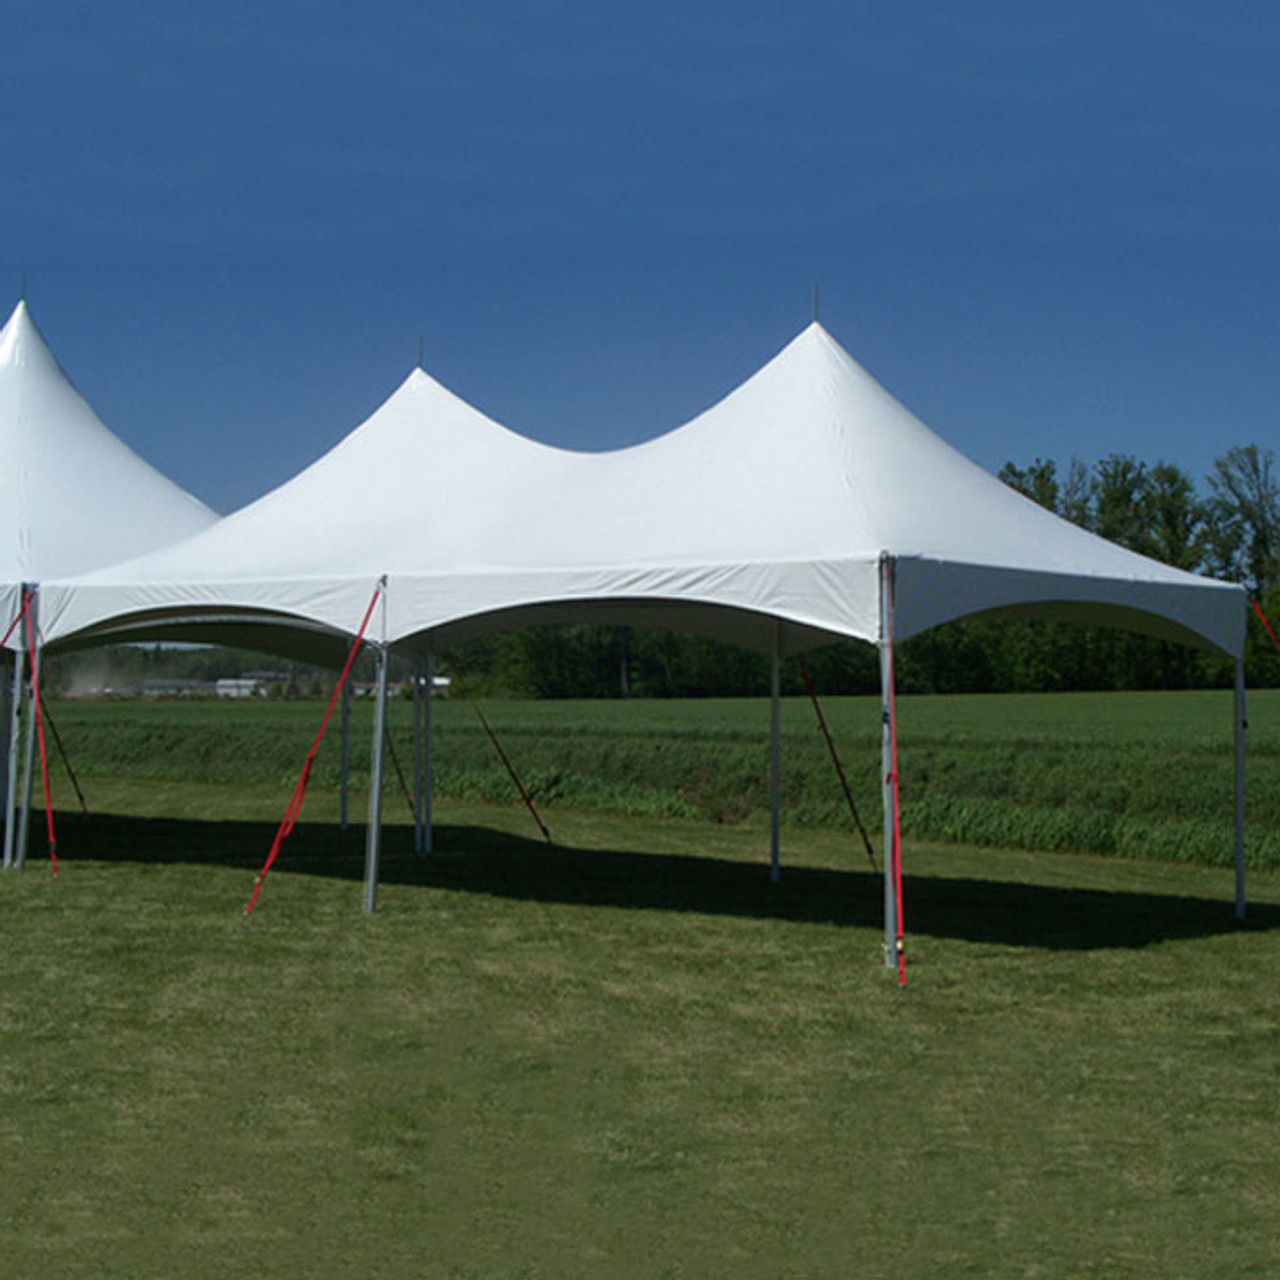 15' x 30' Pinnacle Series, White Cross Cable Tent, Complete.